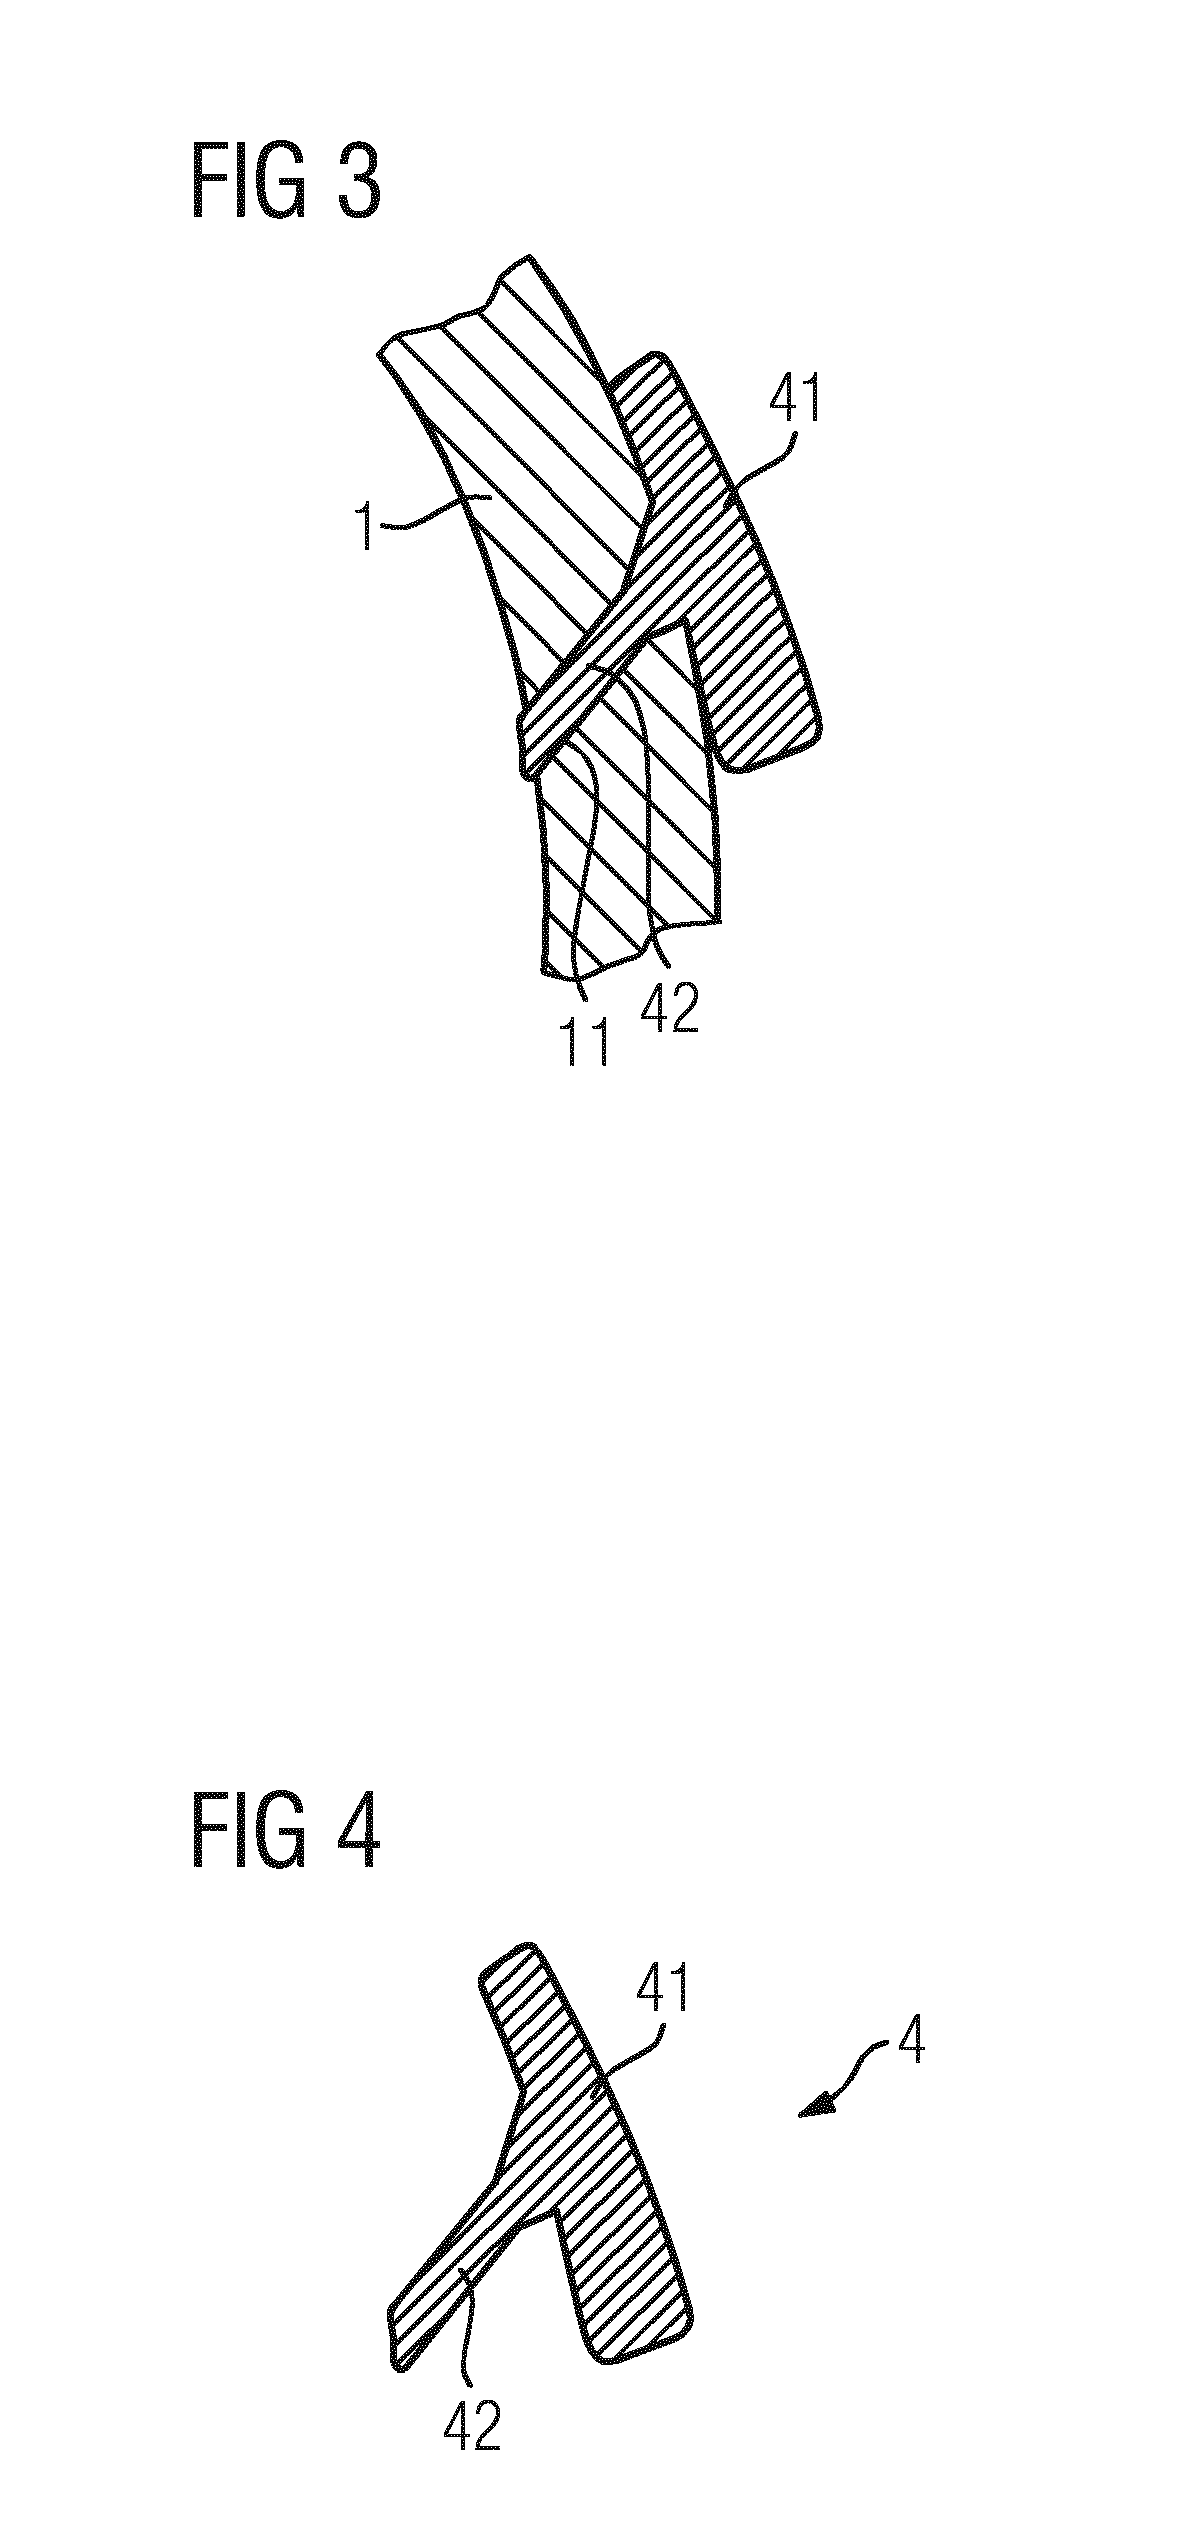 Method for checking cooling holes of a gas turbine blade